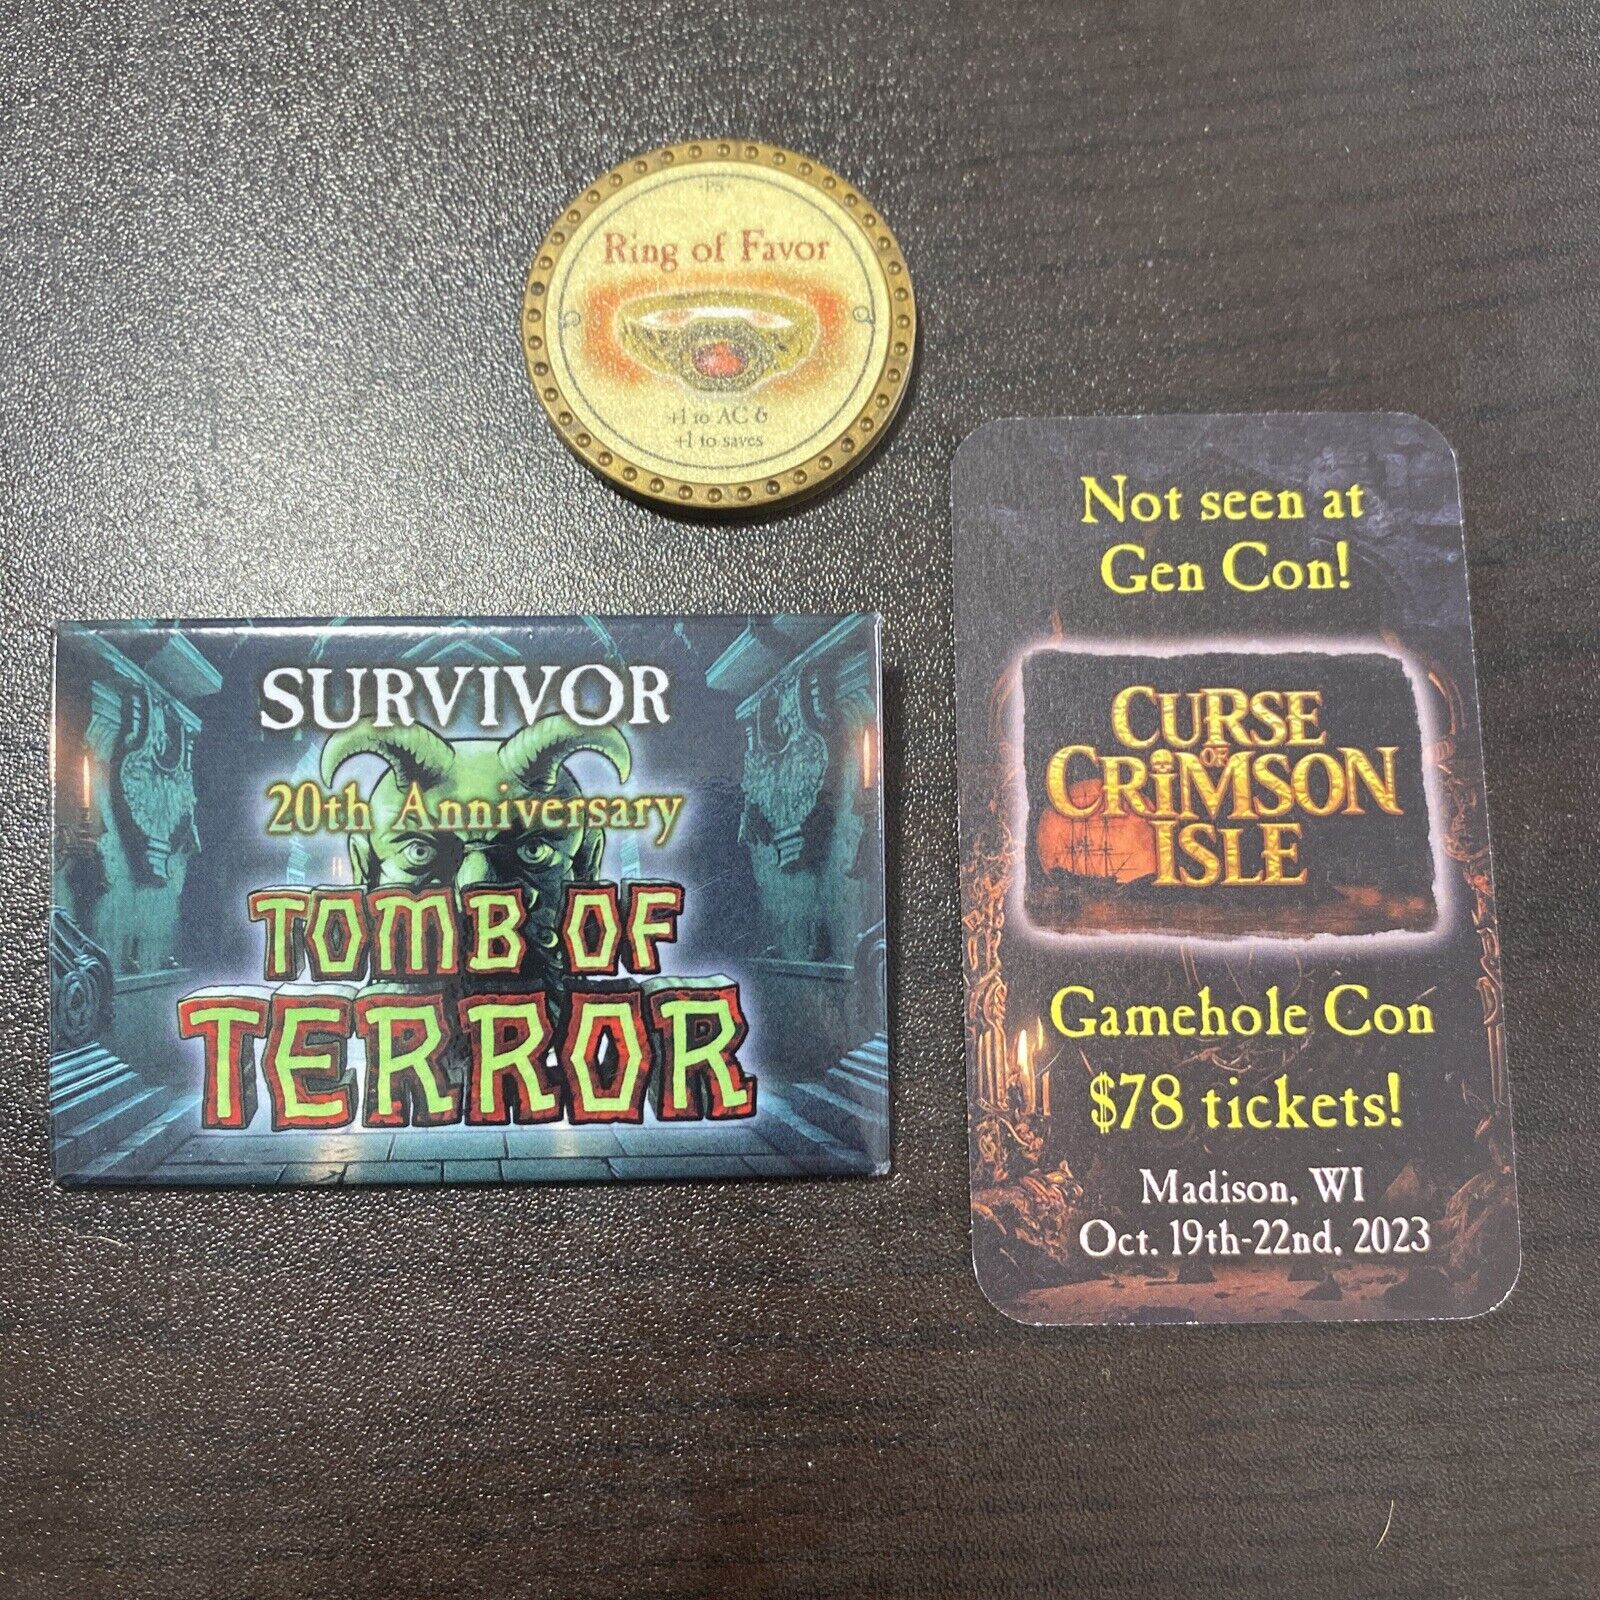 True Dungeon XP Experience Point Code Ring Of Favor Tomb Terror Pin Survivor